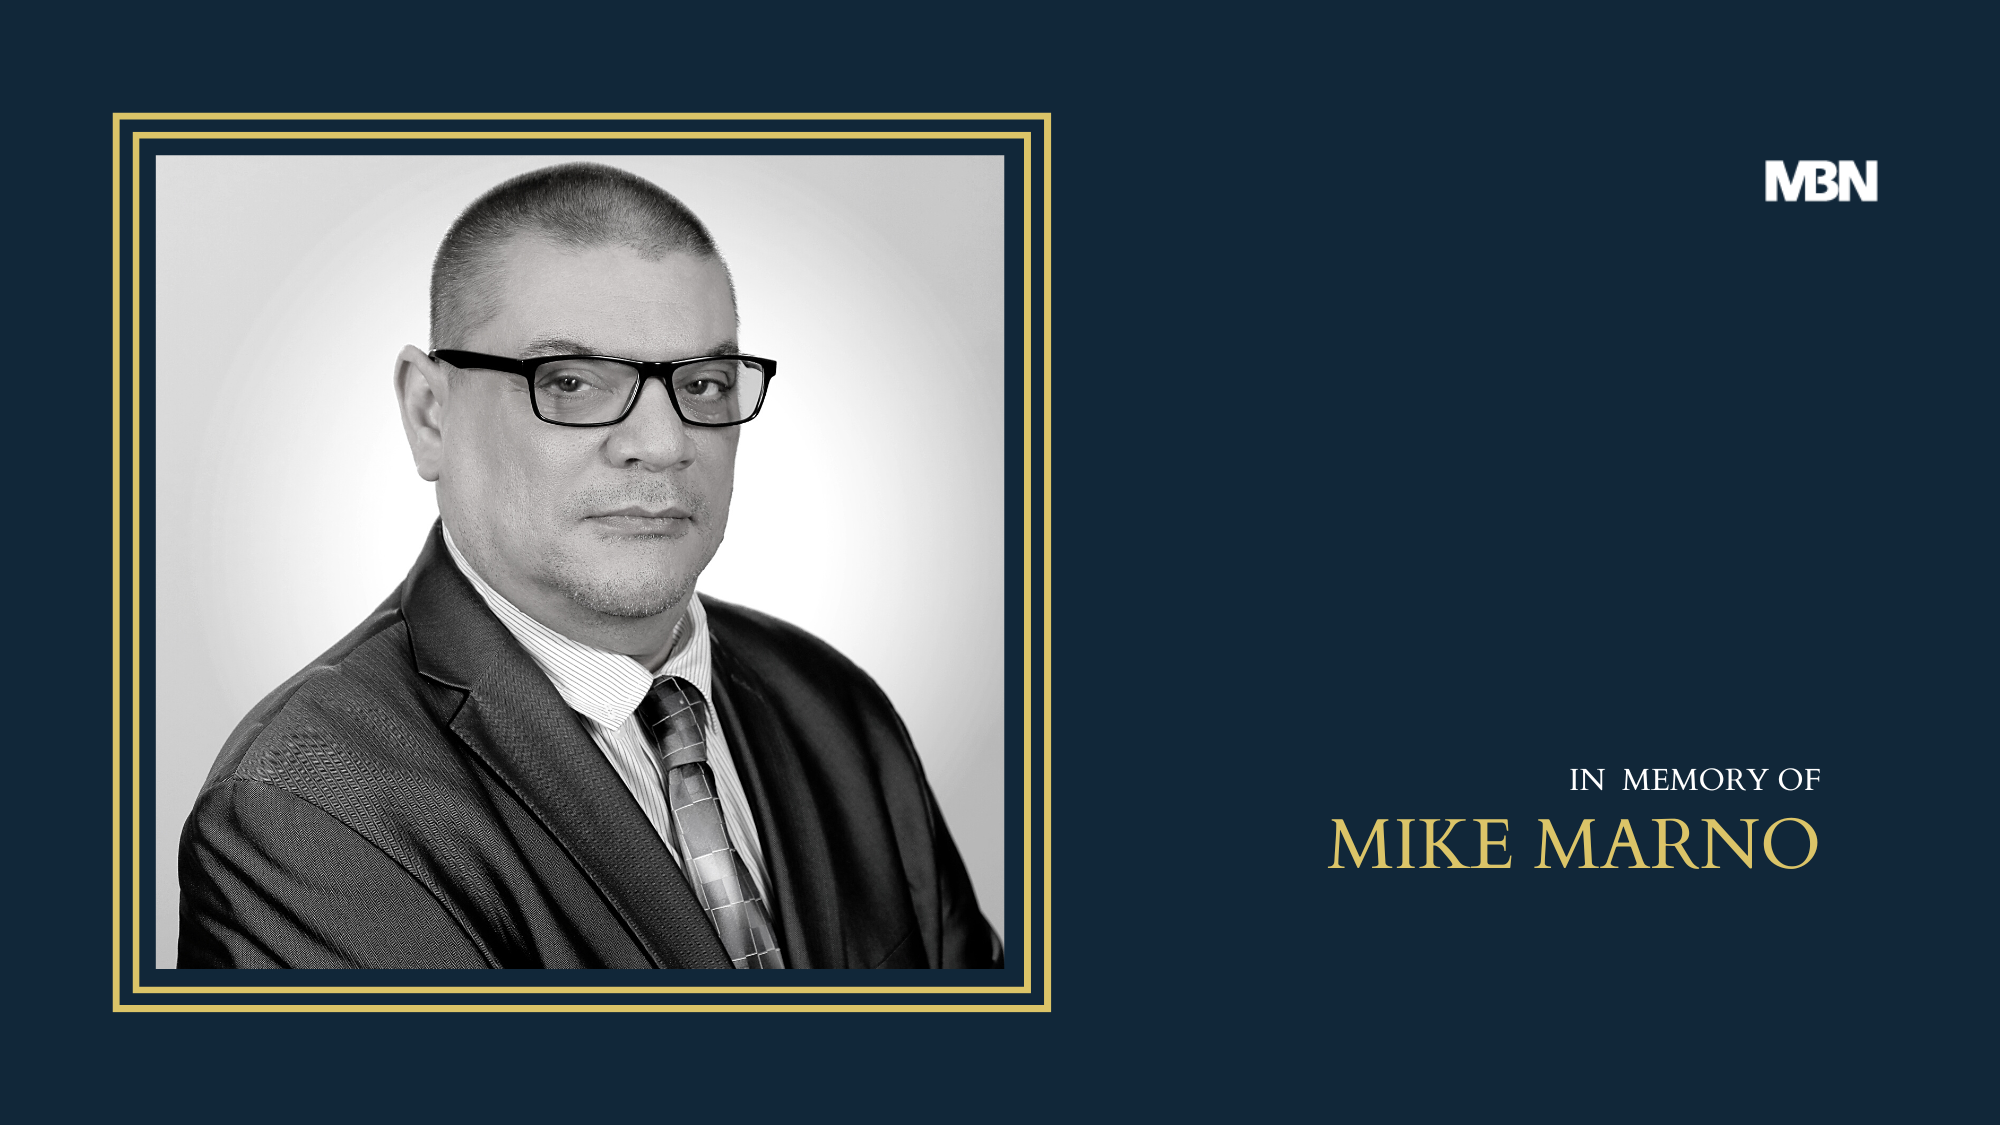 MBN mourns the death of former Vice President and CTO Mike Marno